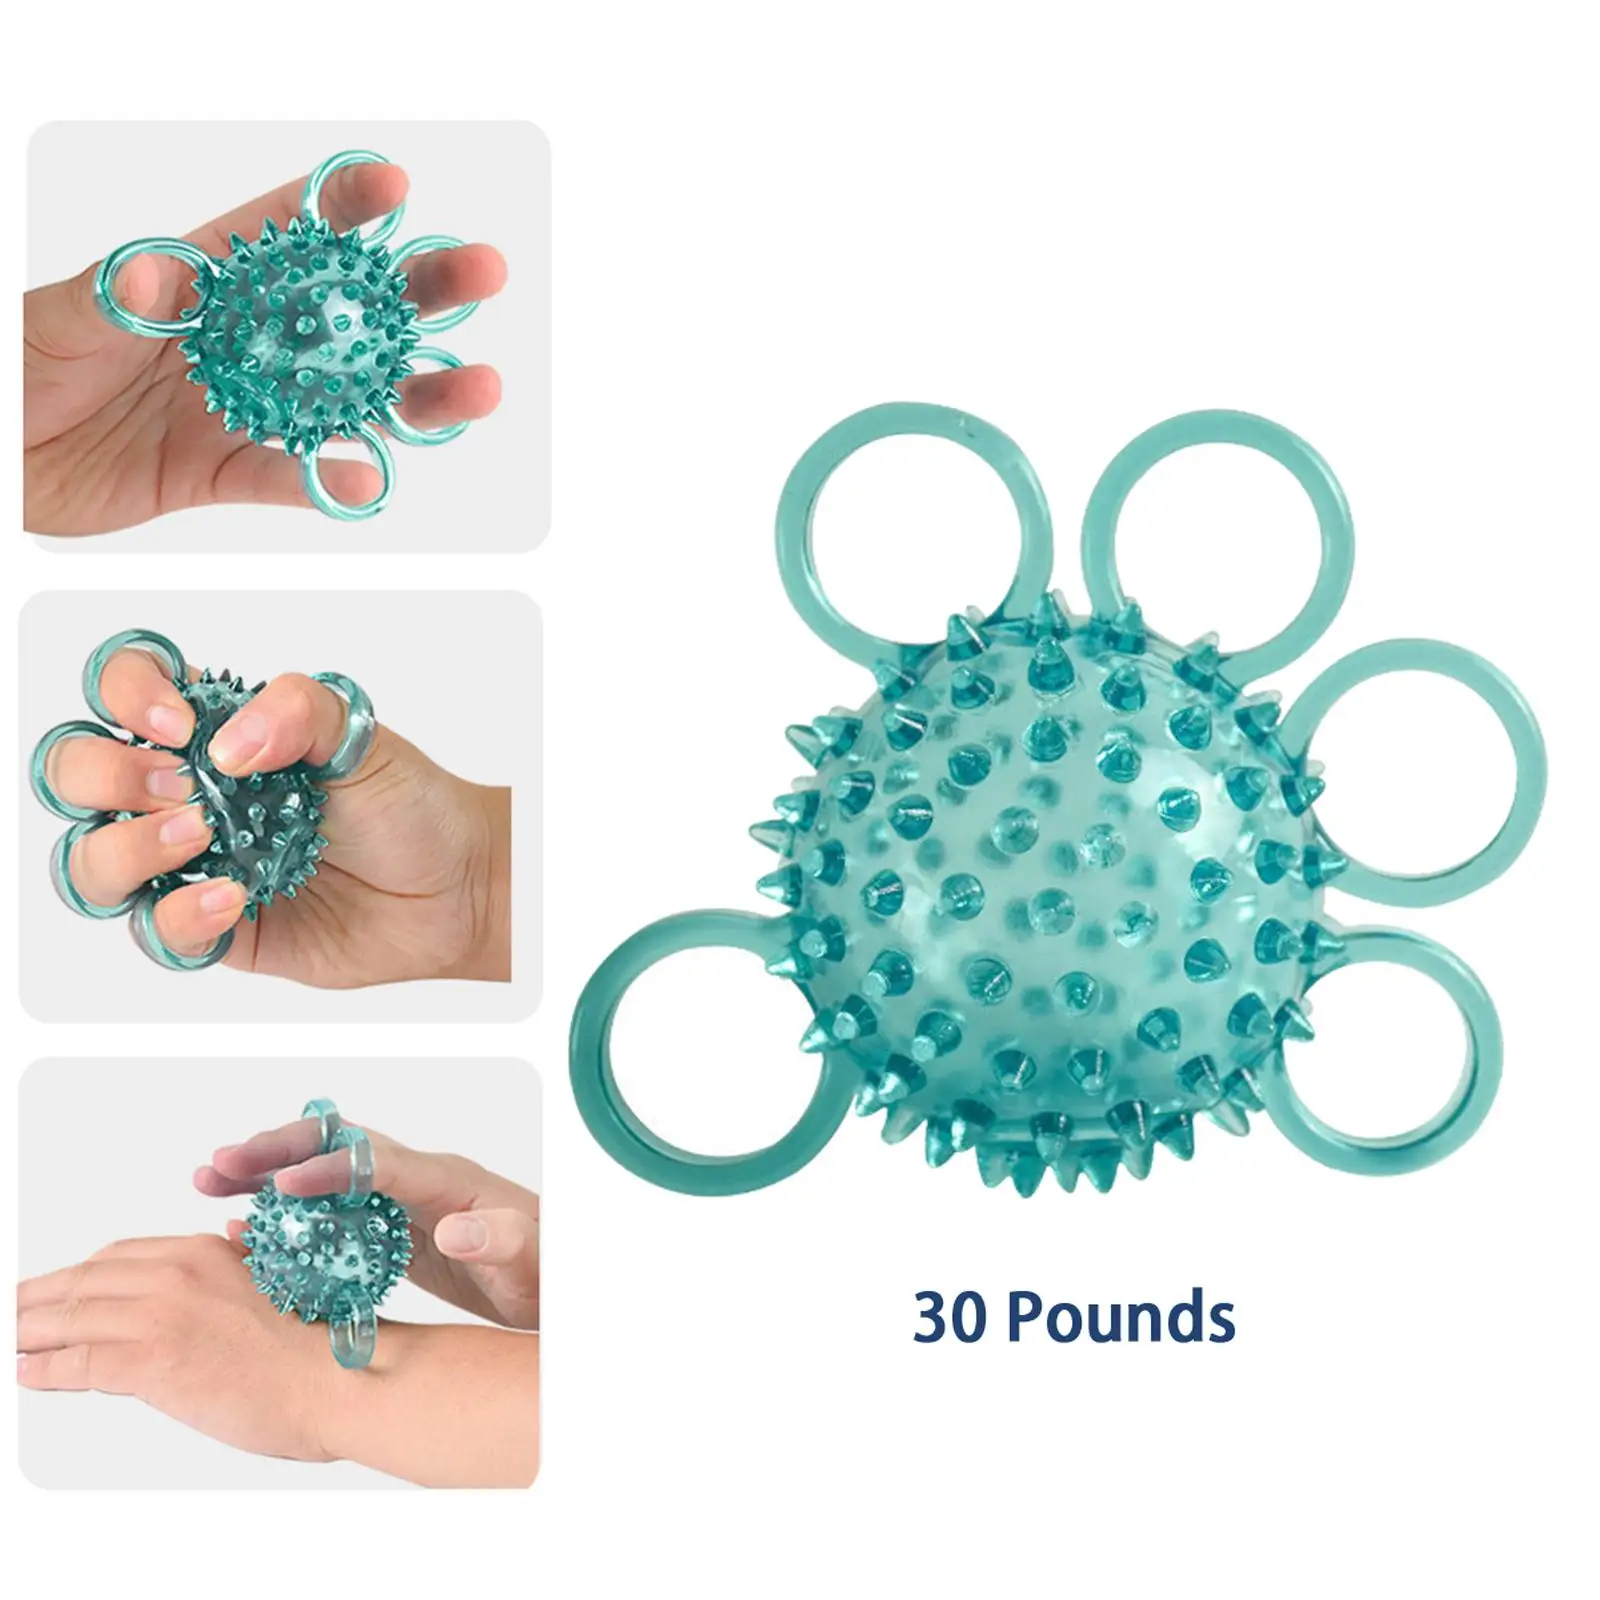 Hand Grip Ball Five Finger Prickly Stress Relief Force Training for Stroke